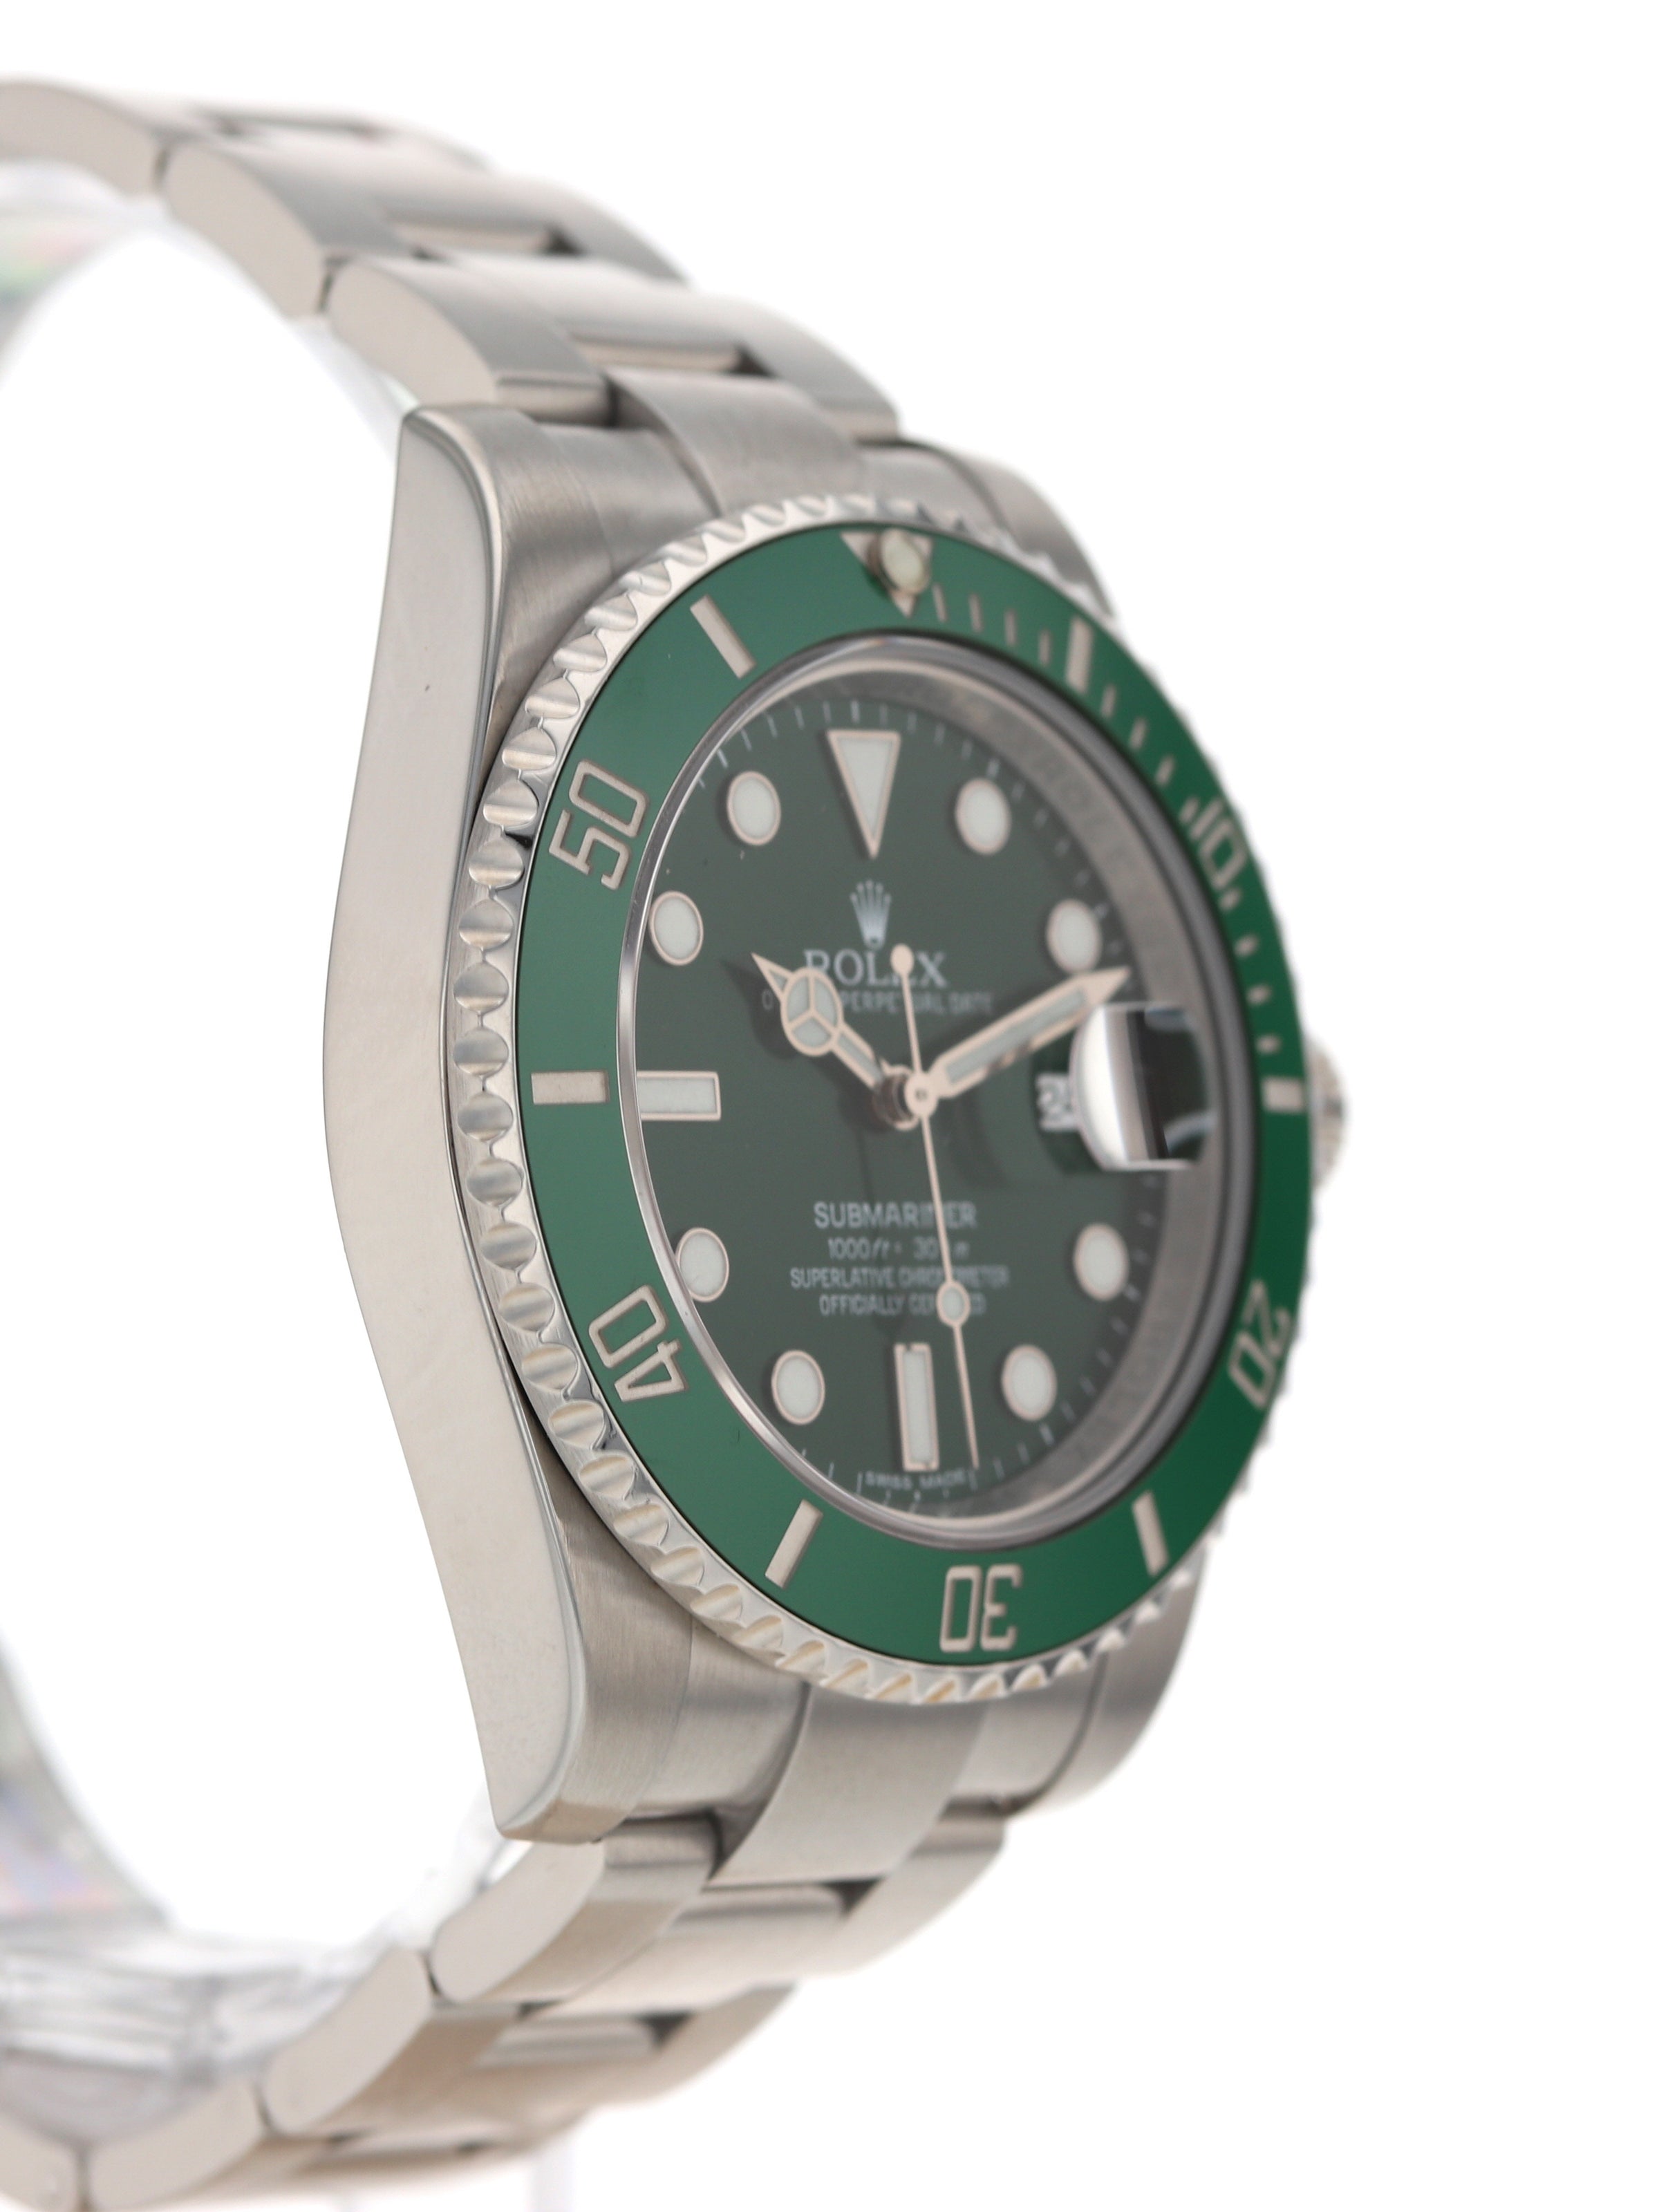 REFERENCE 116610LV SUBMARINER 'HULK' A STAINLESS